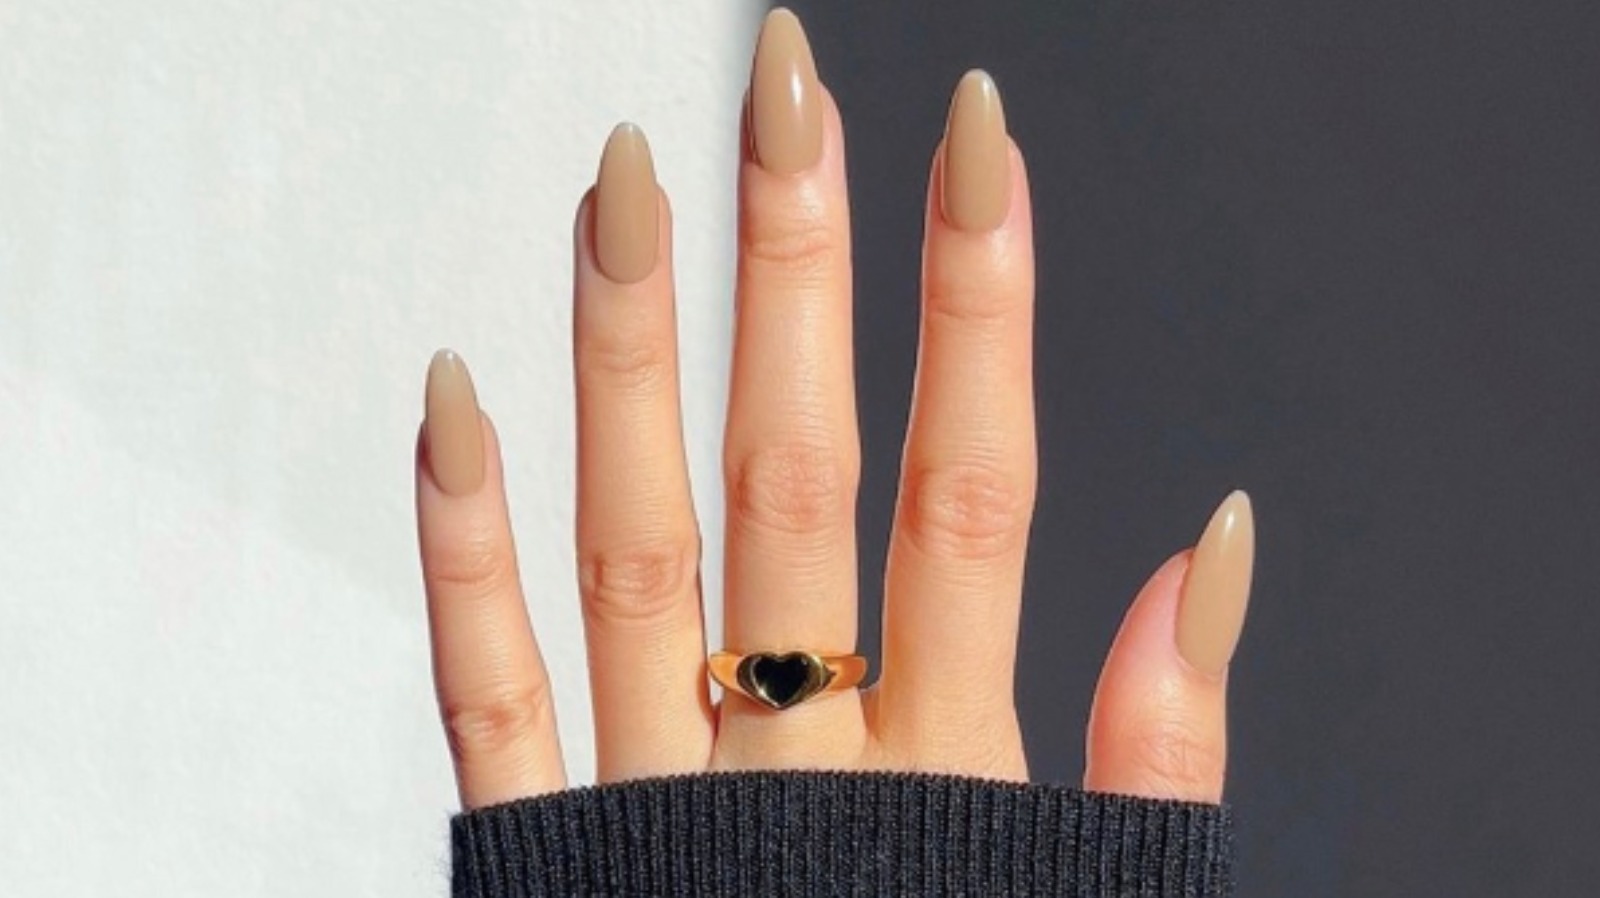 7. Classy Fall Nail Designs with Neutral Colors - wide 7